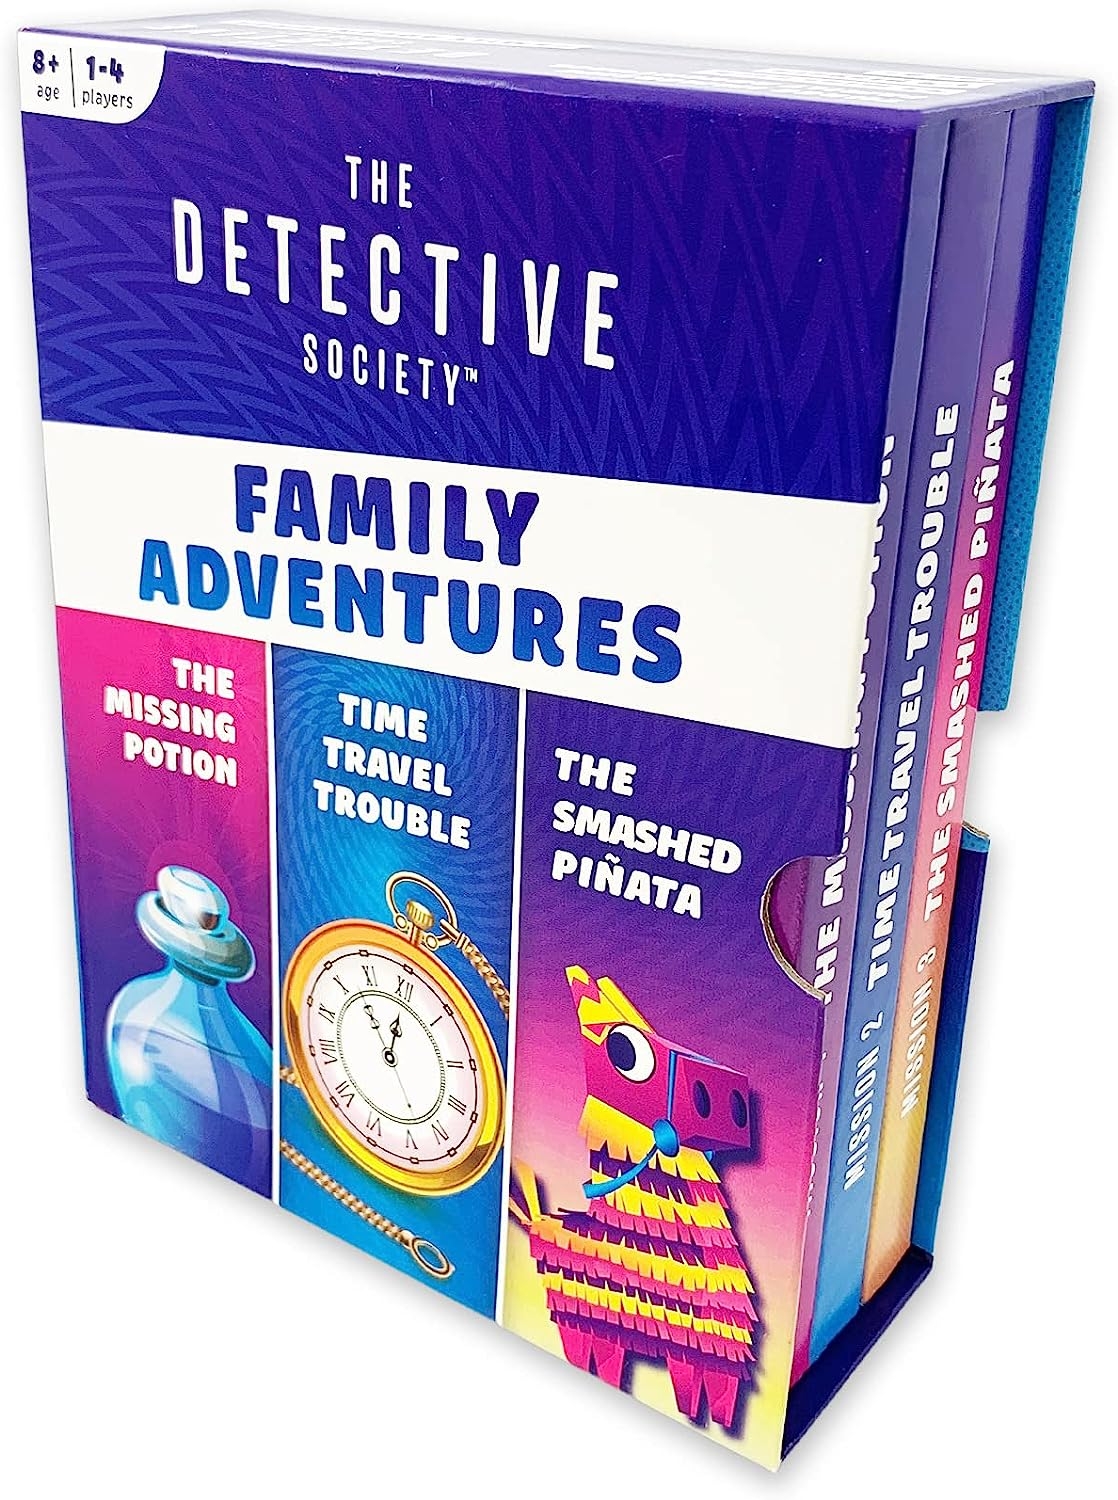 The Detective Society | Family Adventures Best Board Game 2022   price checker   price checker Description Gallery Reviews